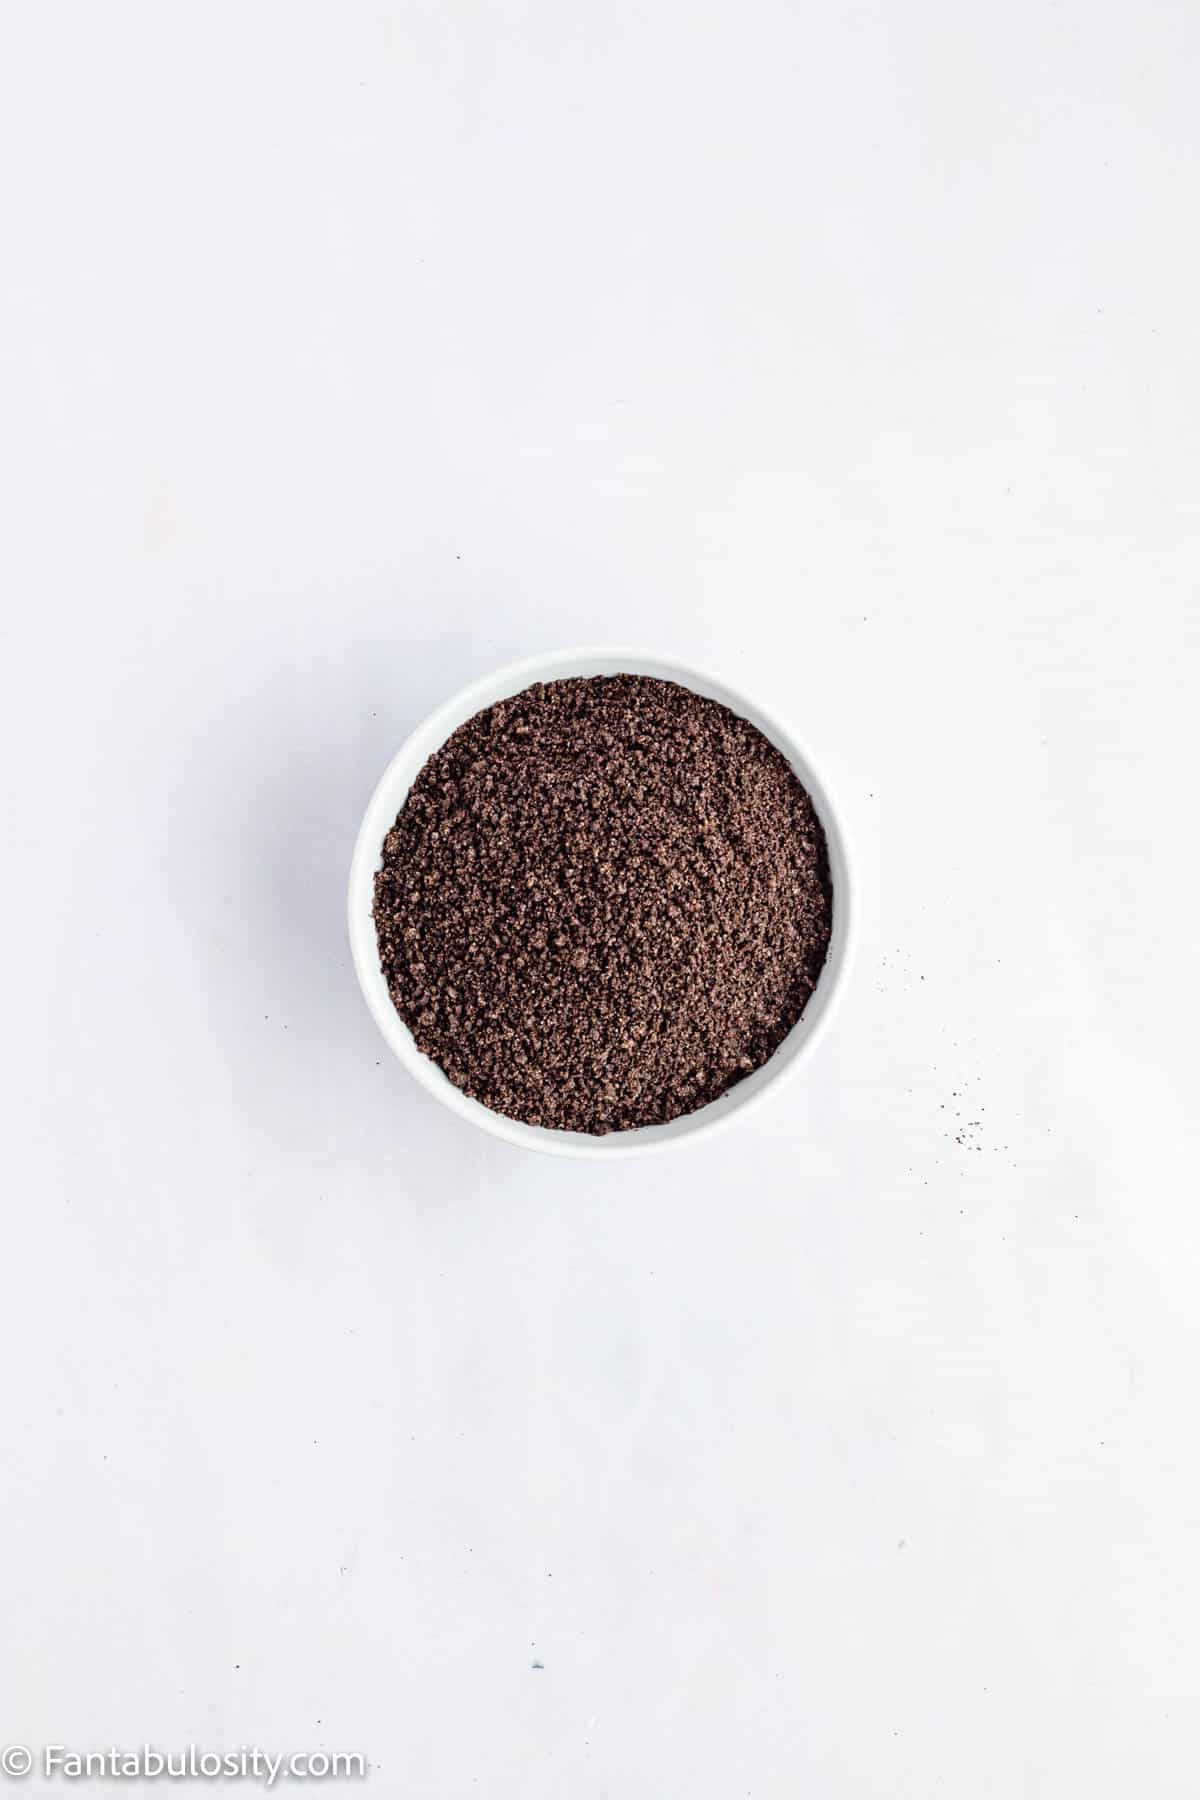 A bowl full of fine Oreo cookie crumbs is centered on a white background